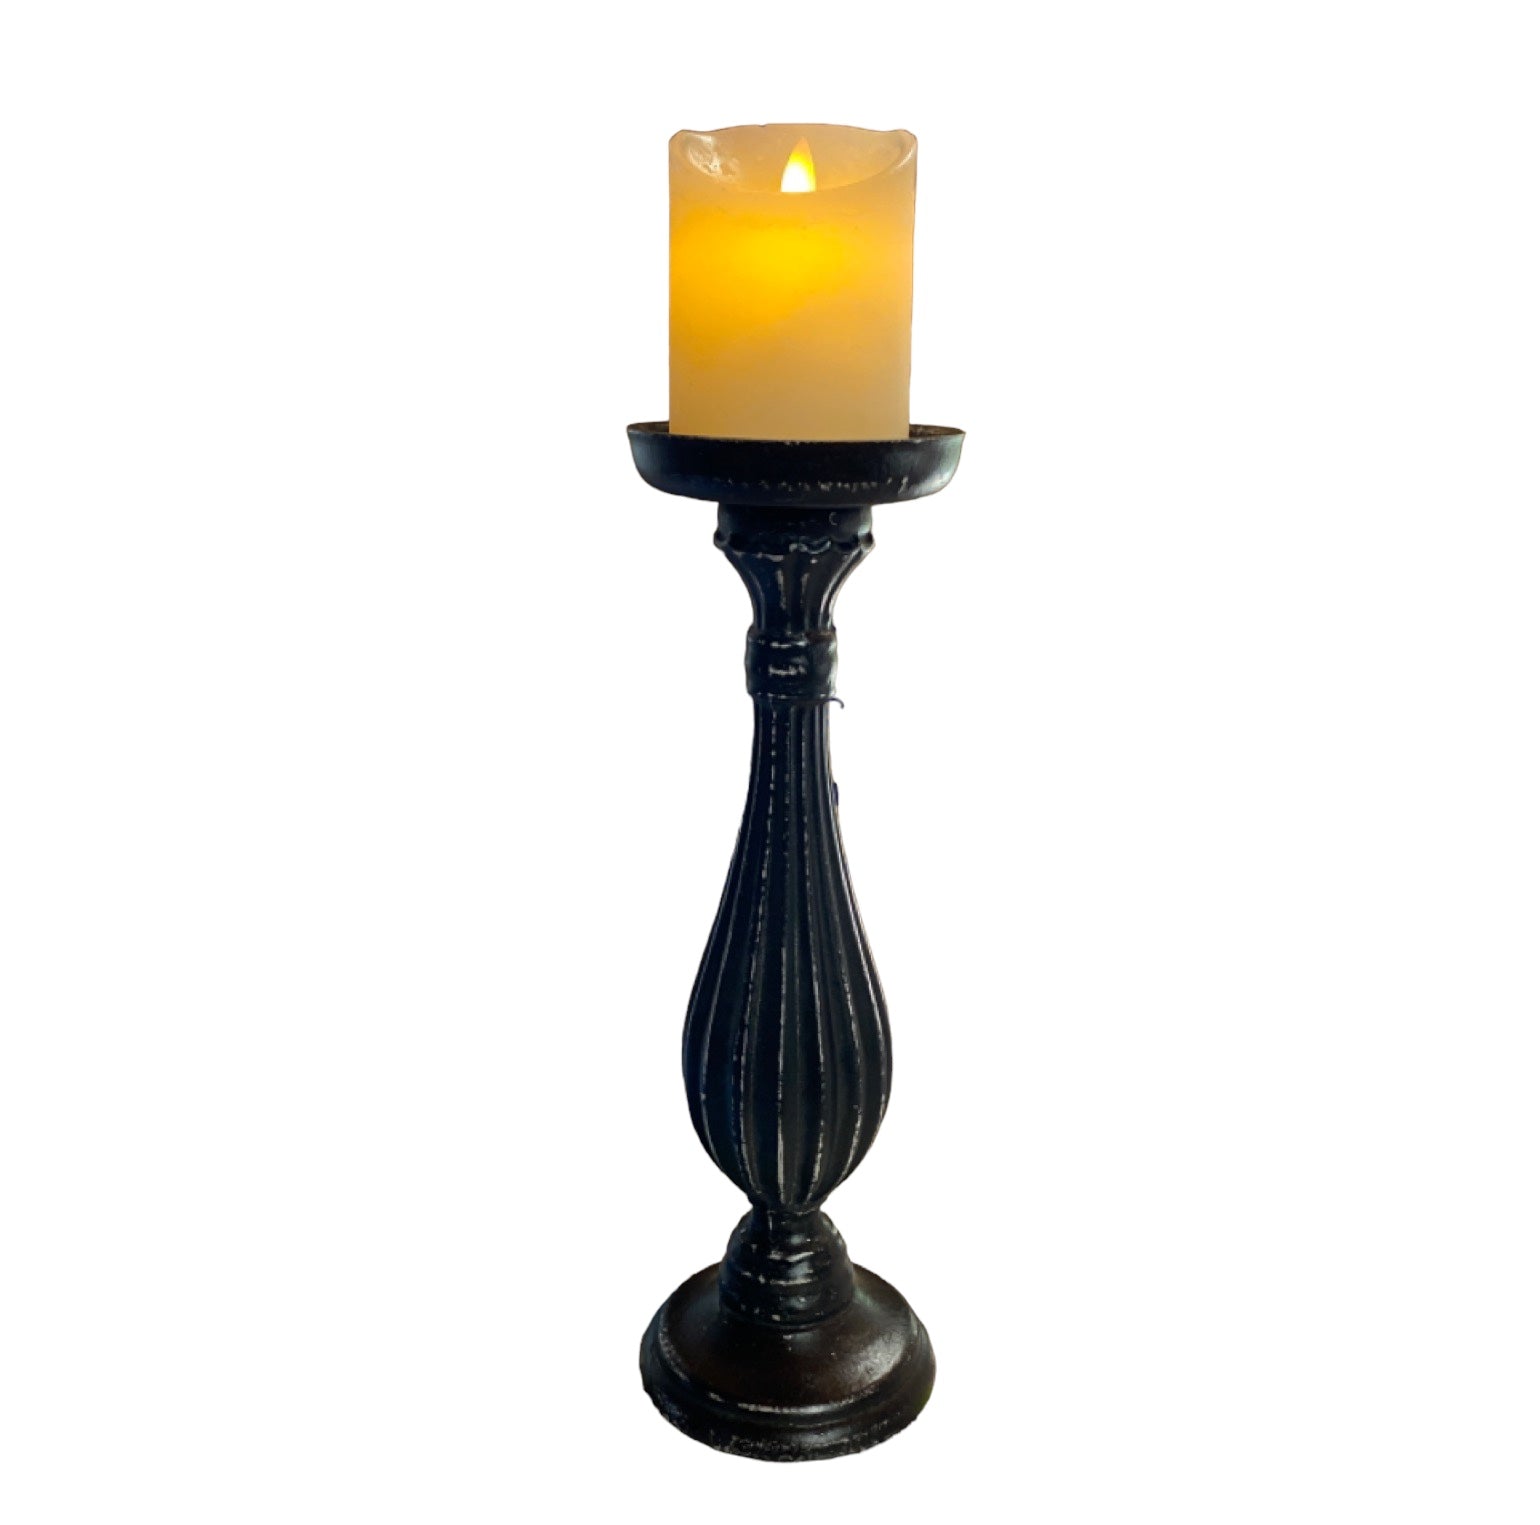 Candle Holder Pillar Vintage Black - The Renmy Store Homewares & Gifts 